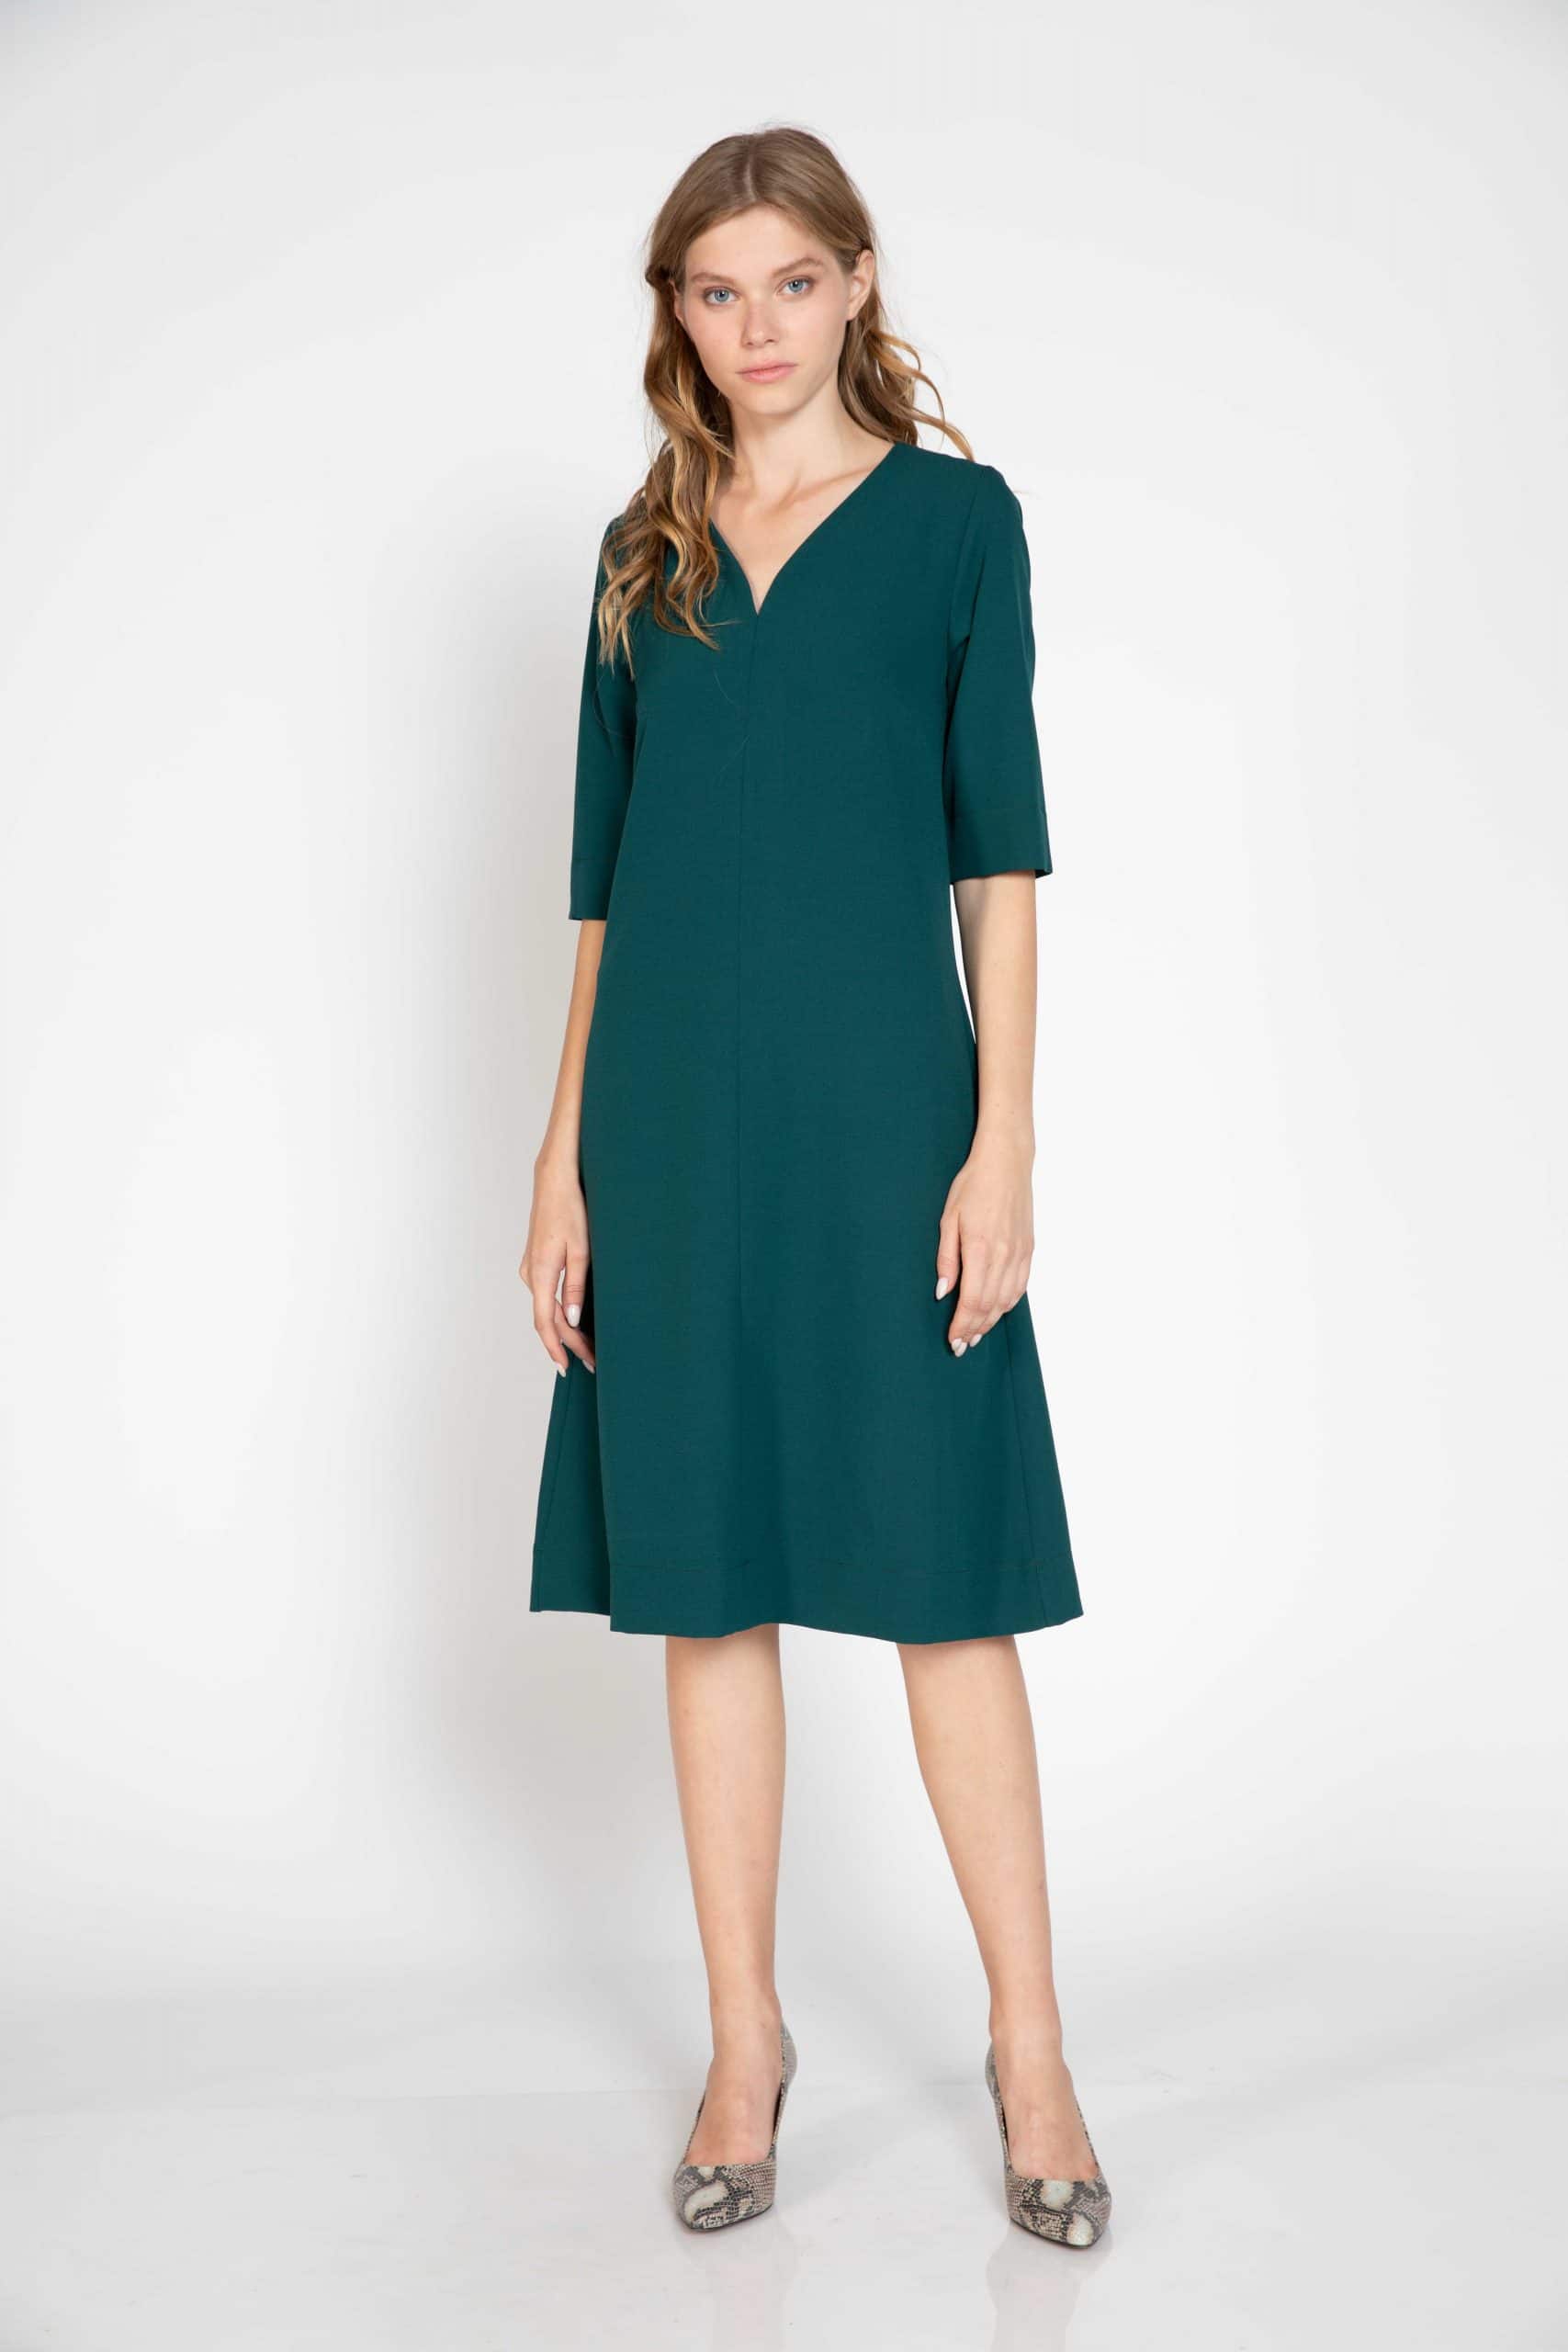 33 Best Mother of the Bride Dresses That Are Not Frumpy